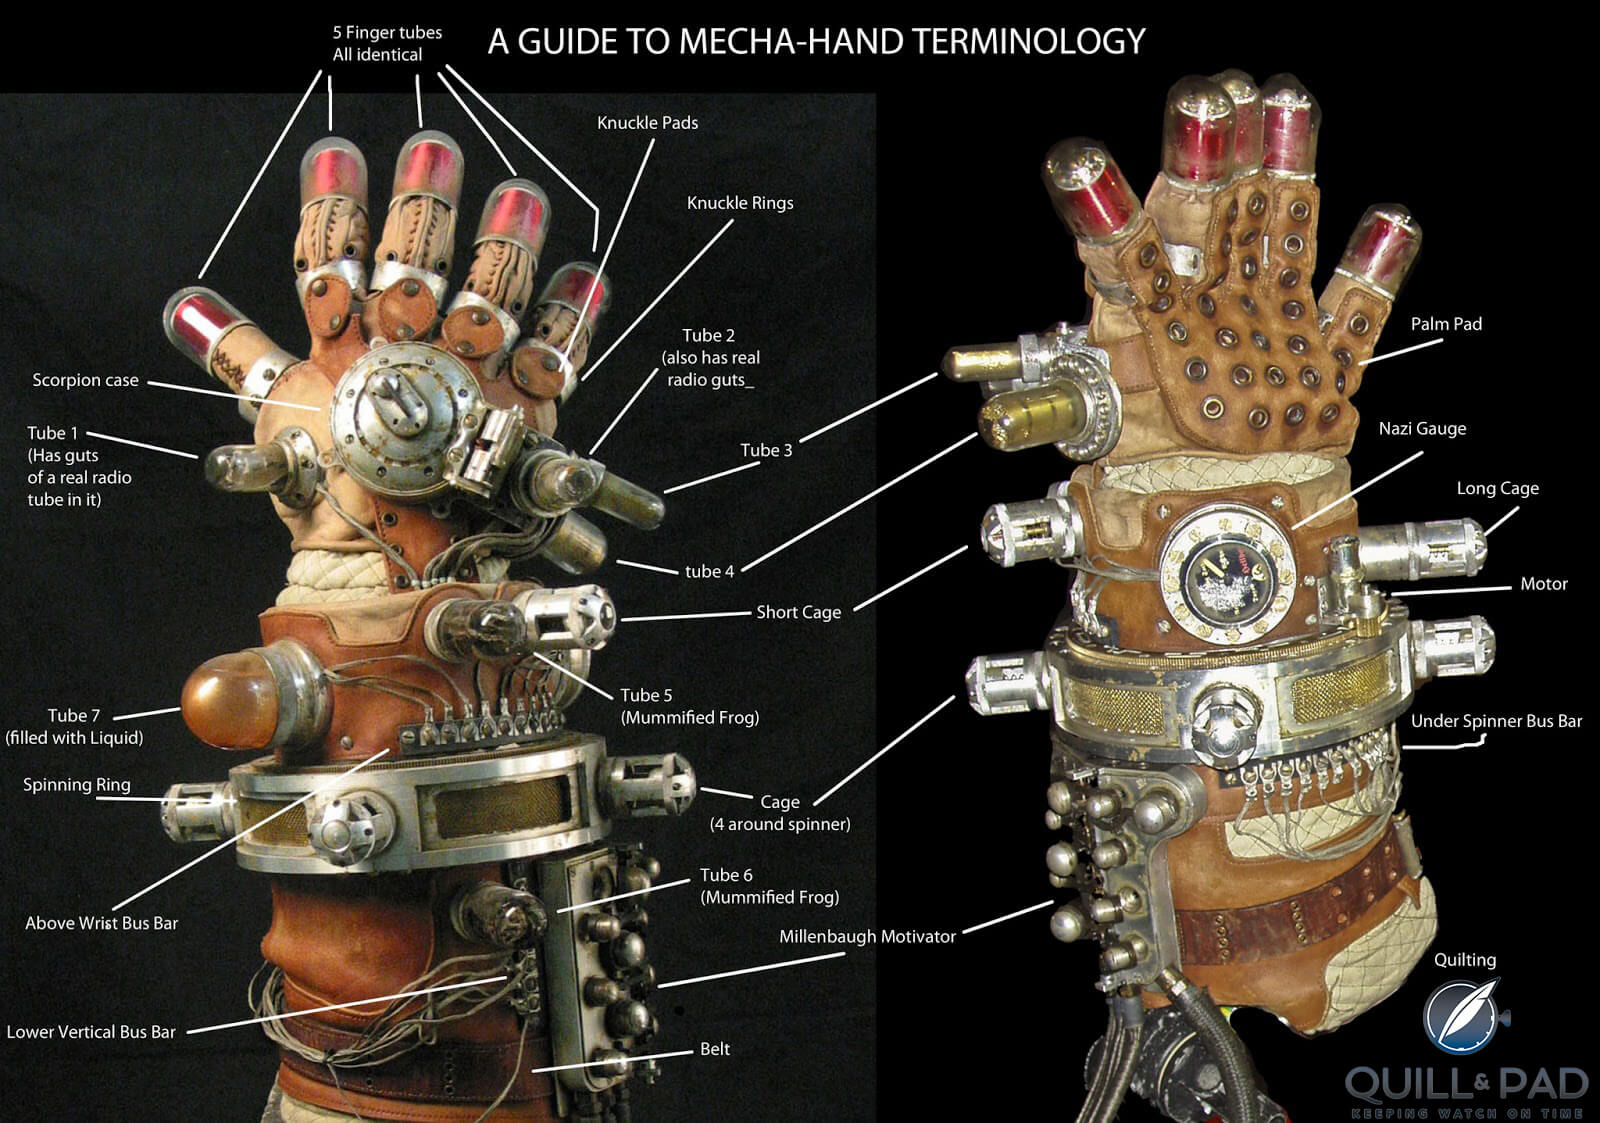 Mecha-glove from the movie 'Hellboy' 